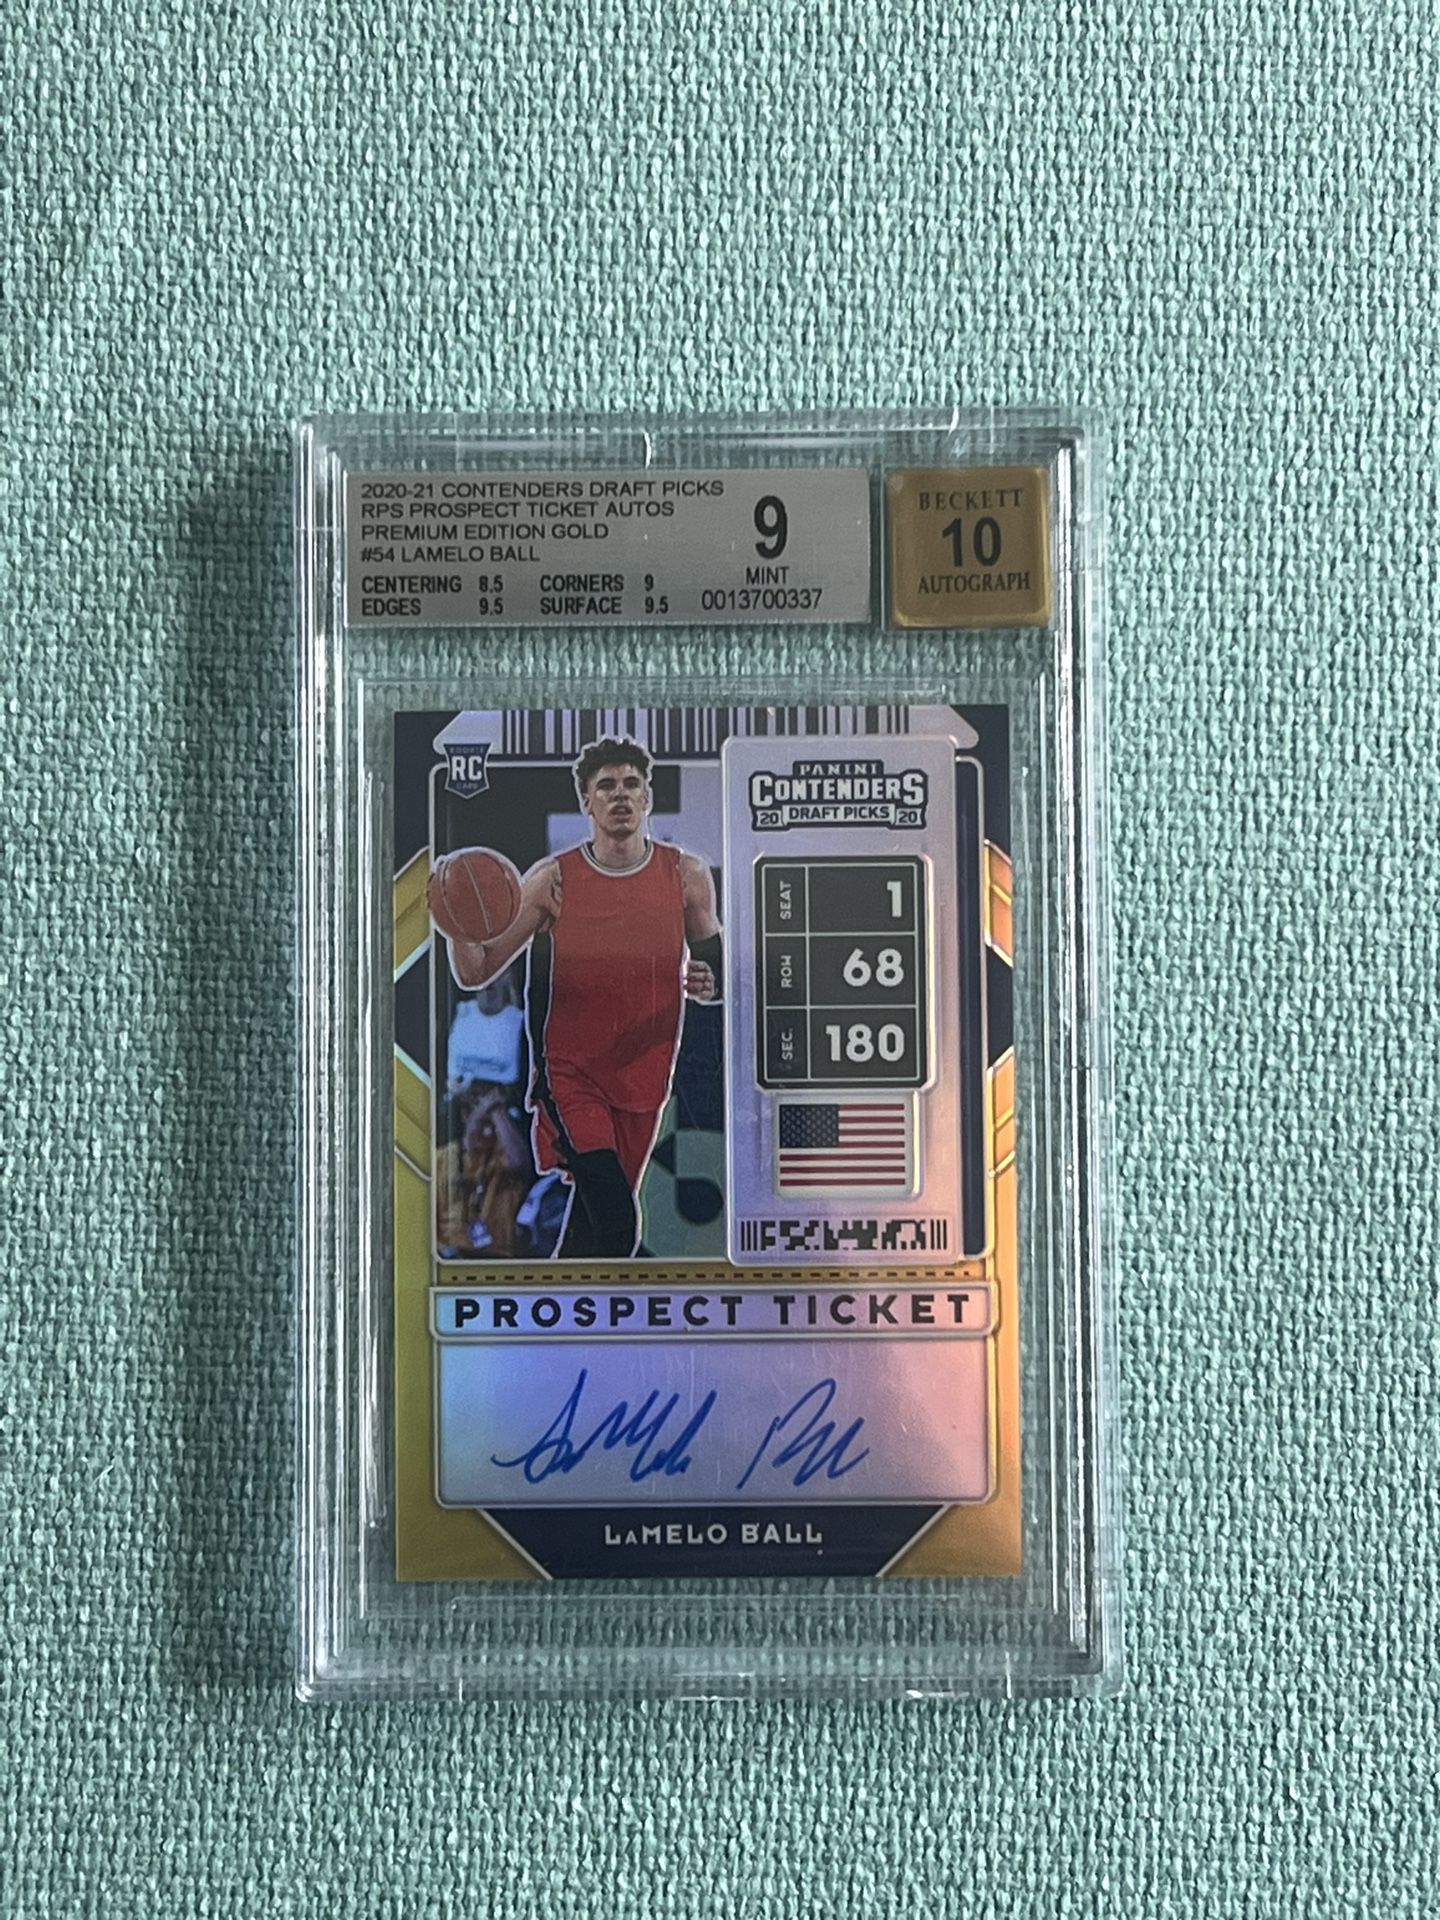 2020 Contenders Draft Picks Rps Prospects Ticket Auto Premium Edition Gold 54 Lamelo Ball 10 